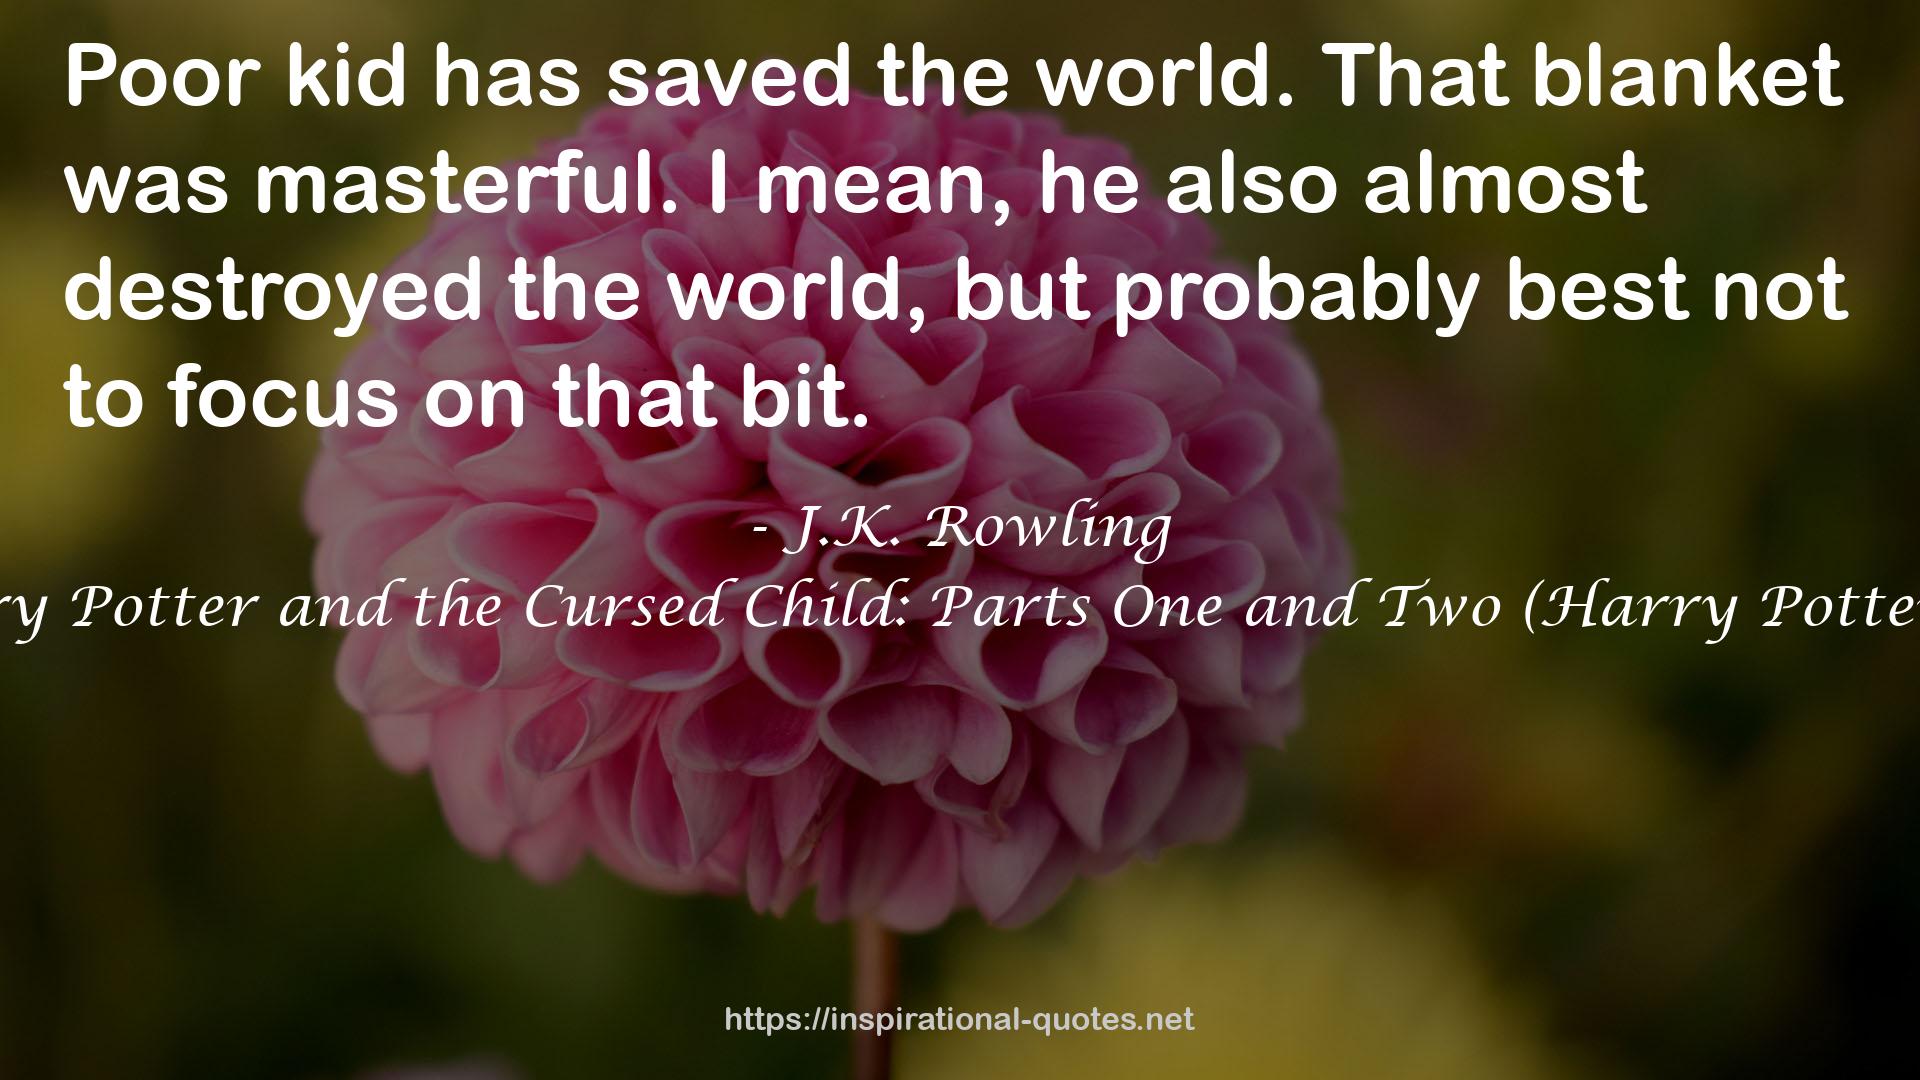 Harry Potter and the Cursed Child: Parts One and Two (Harry Potter, #8) QUOTES